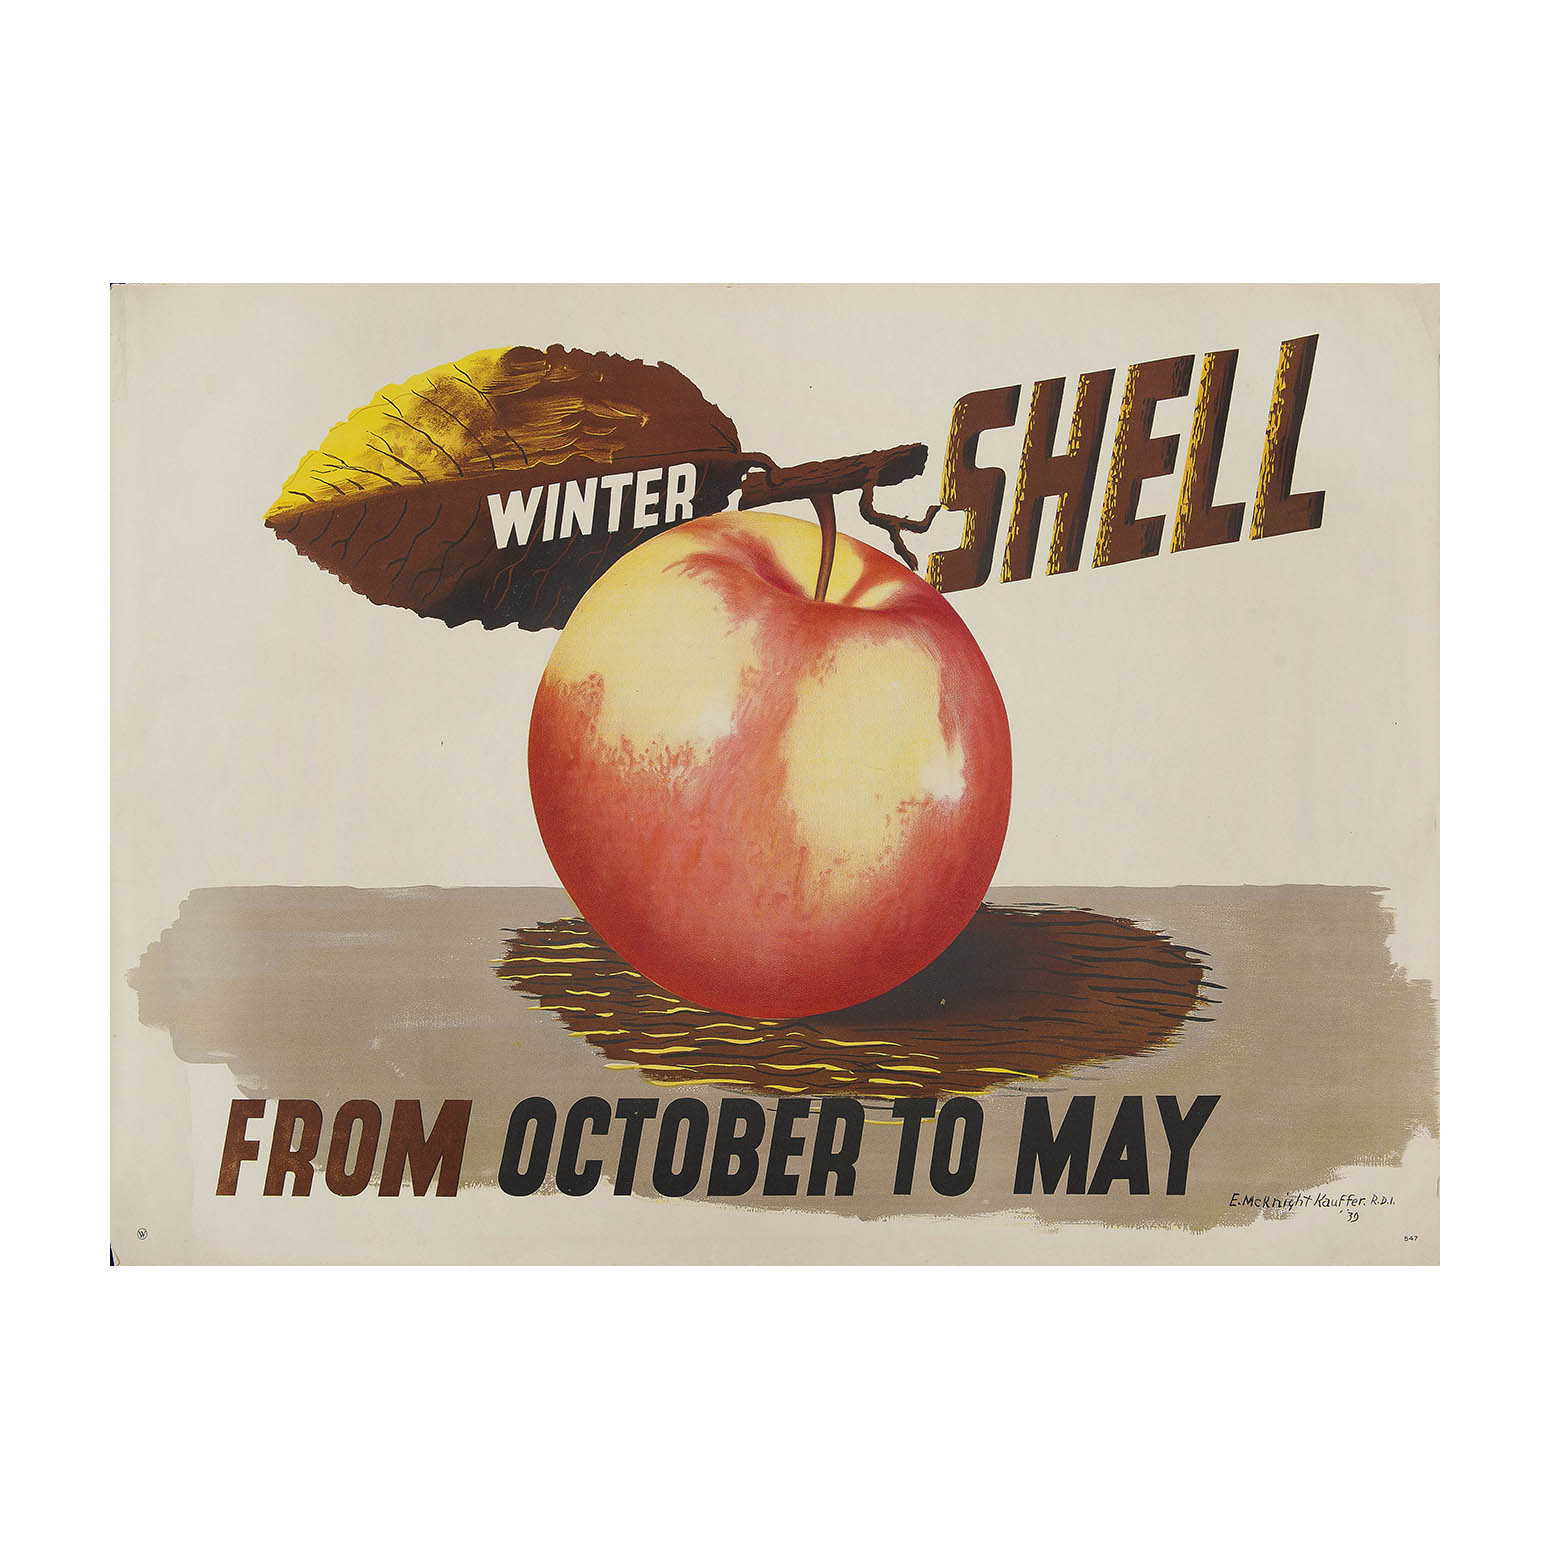 Original poster: Winter Shell from October to May, by Edward McKnight Kauffer, 1939. Design depicts single apple with autumnal leaf